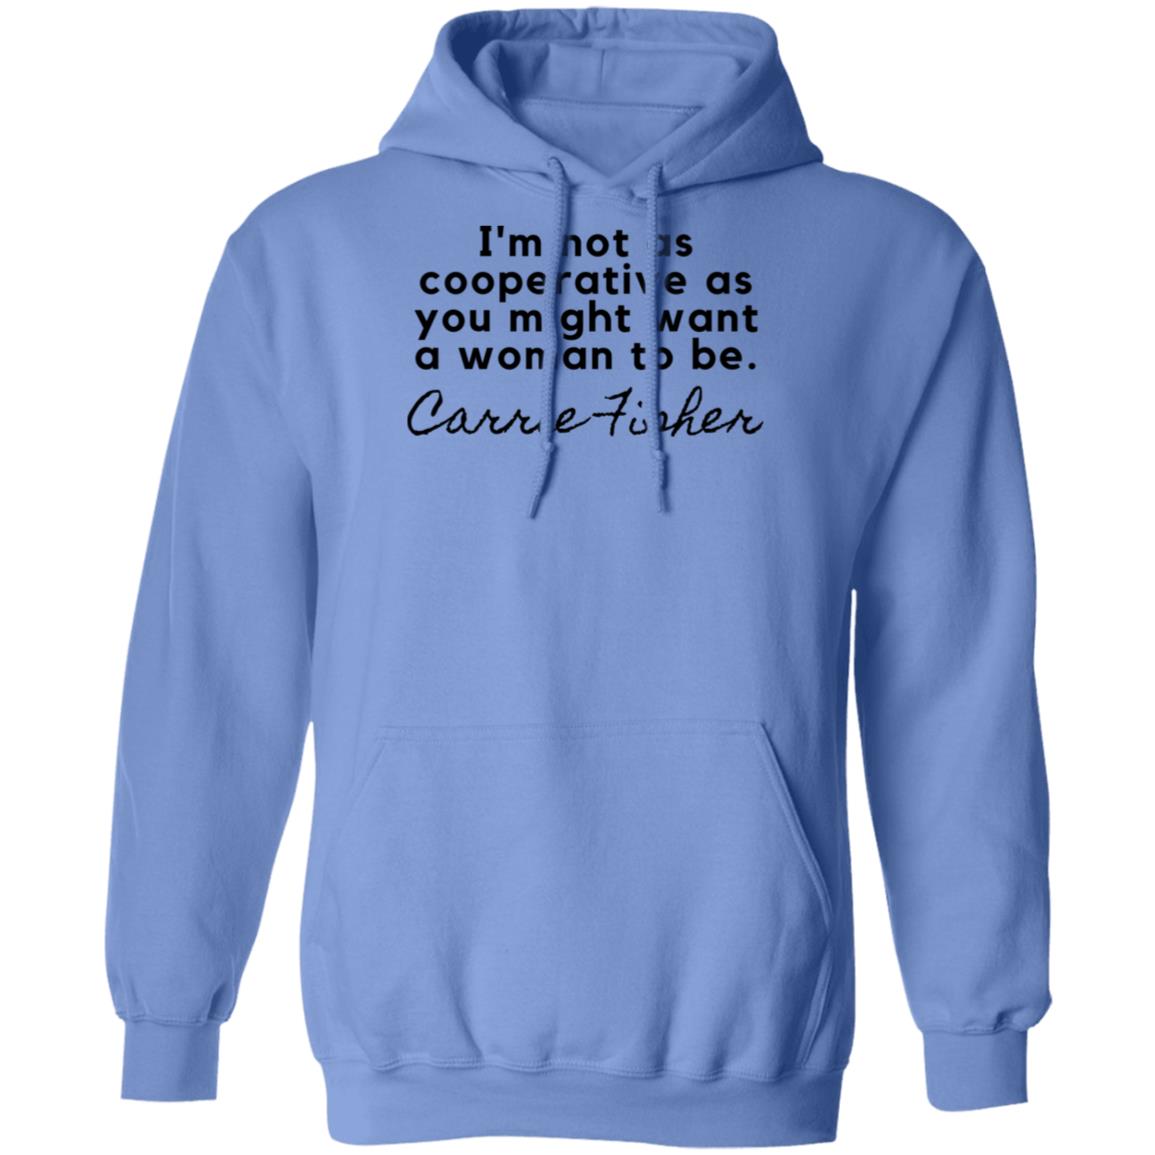 Carrie Fisher Cooperative Woman Quote Hooded Sweatshirt